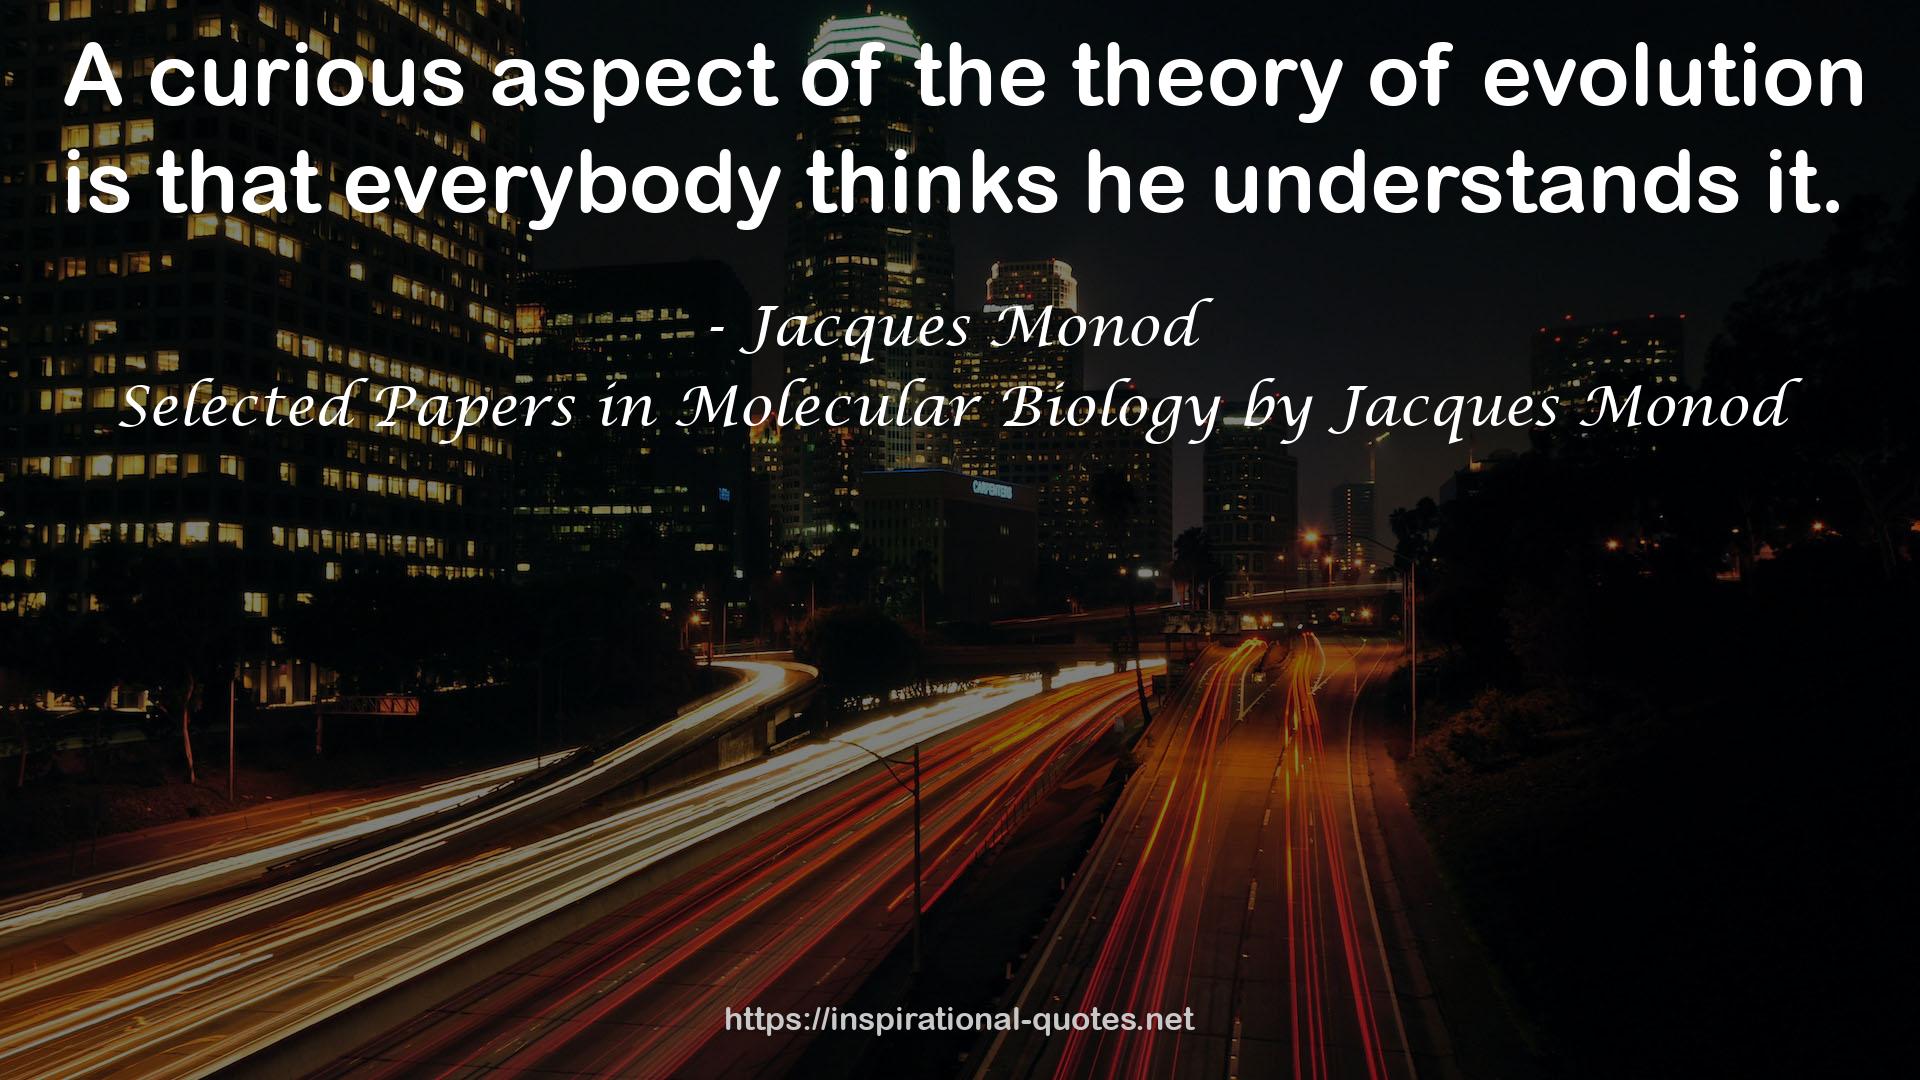 Selected Papers in Molecular Biology by Jacques Monod QUOTES